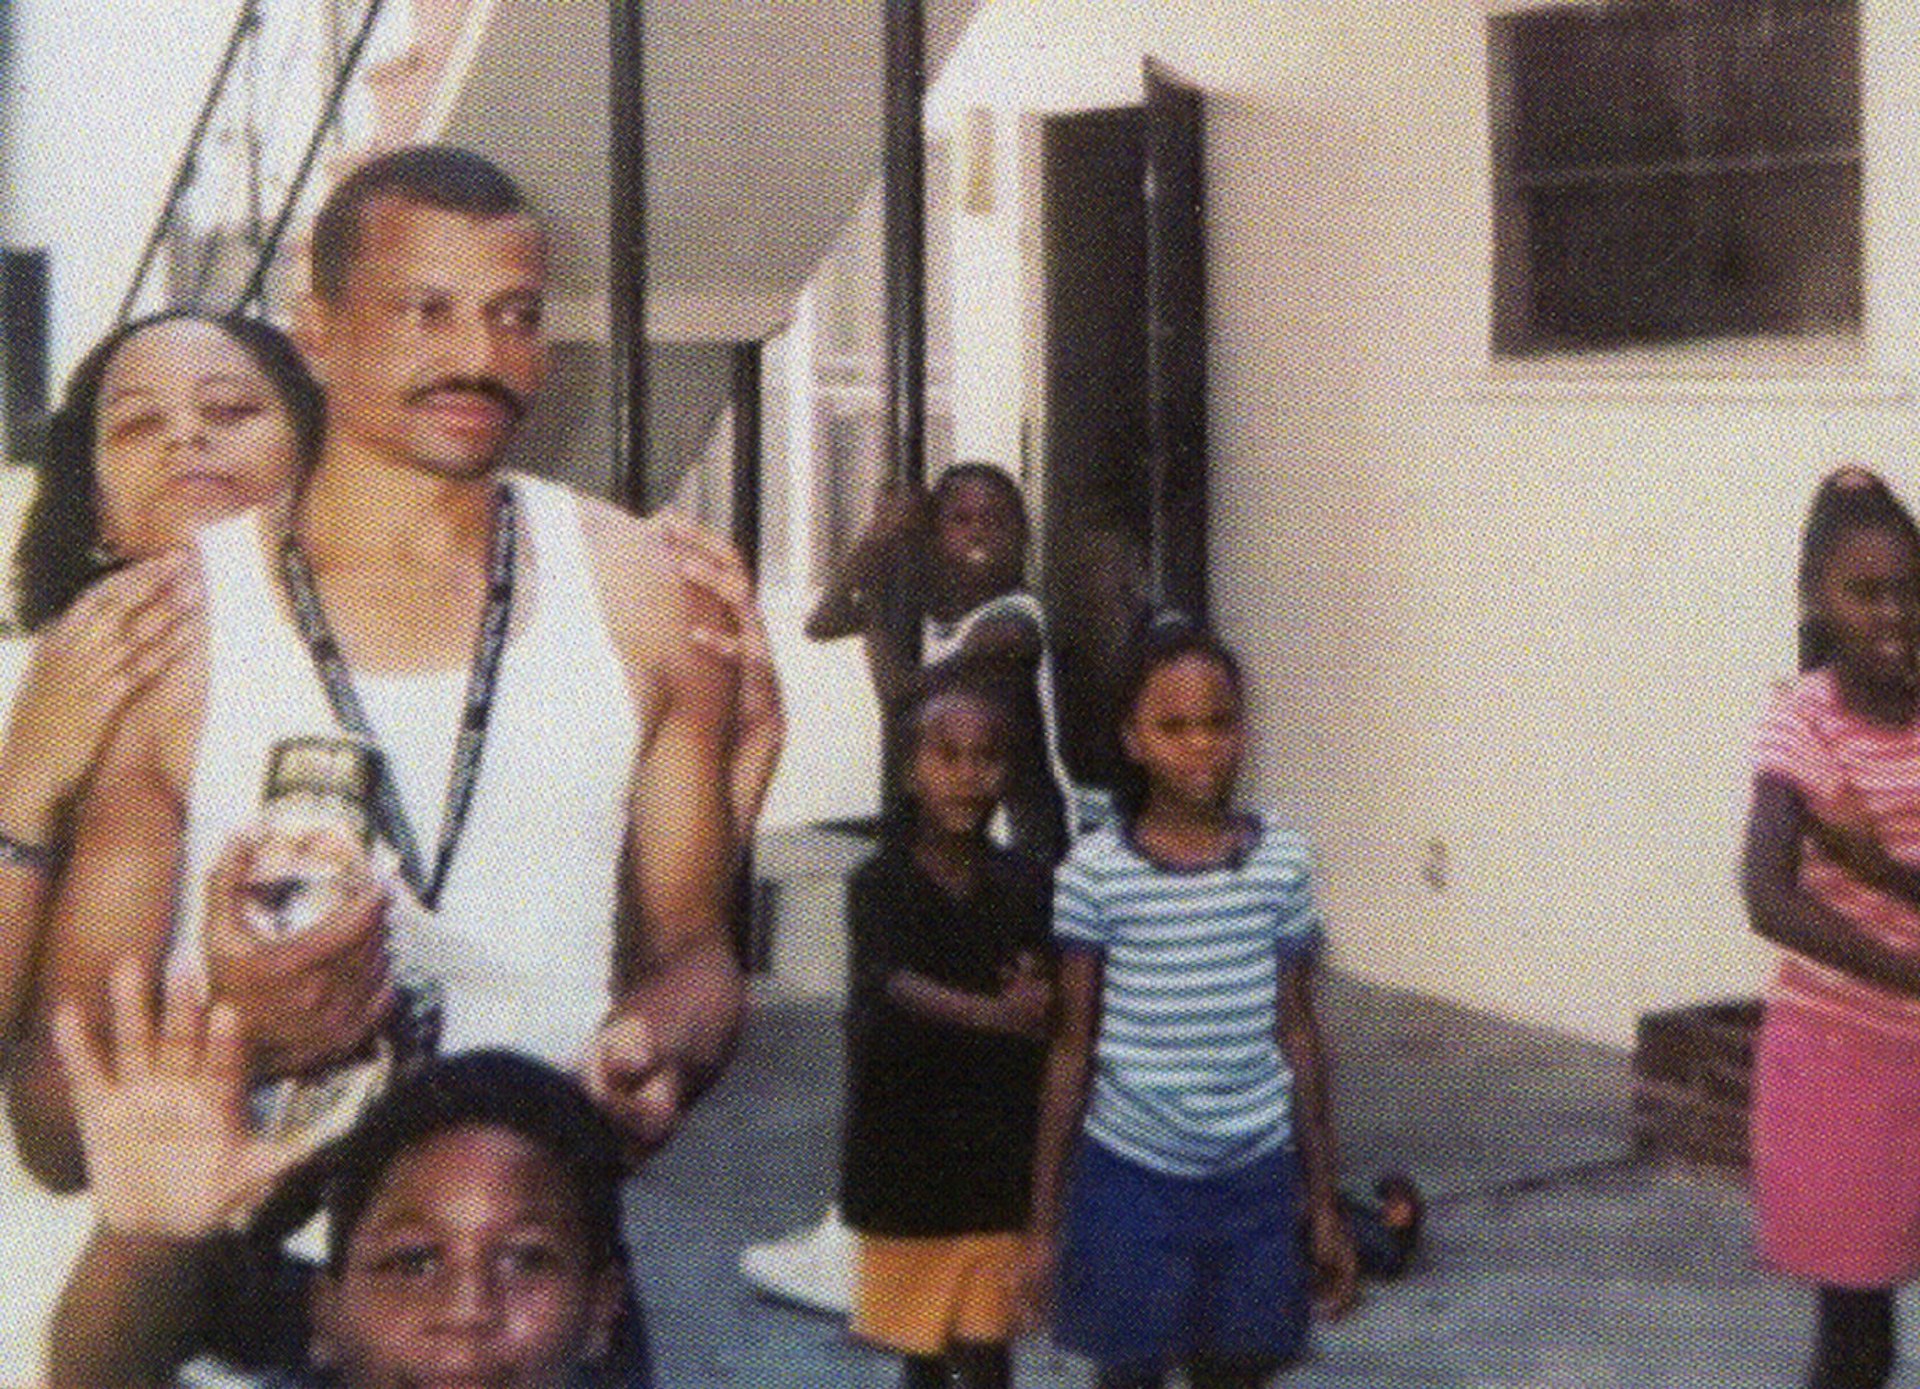 Andre Butler, as a young man, stands near a staircase, as a woman places her hands on his shoulders, and several children play nearby.